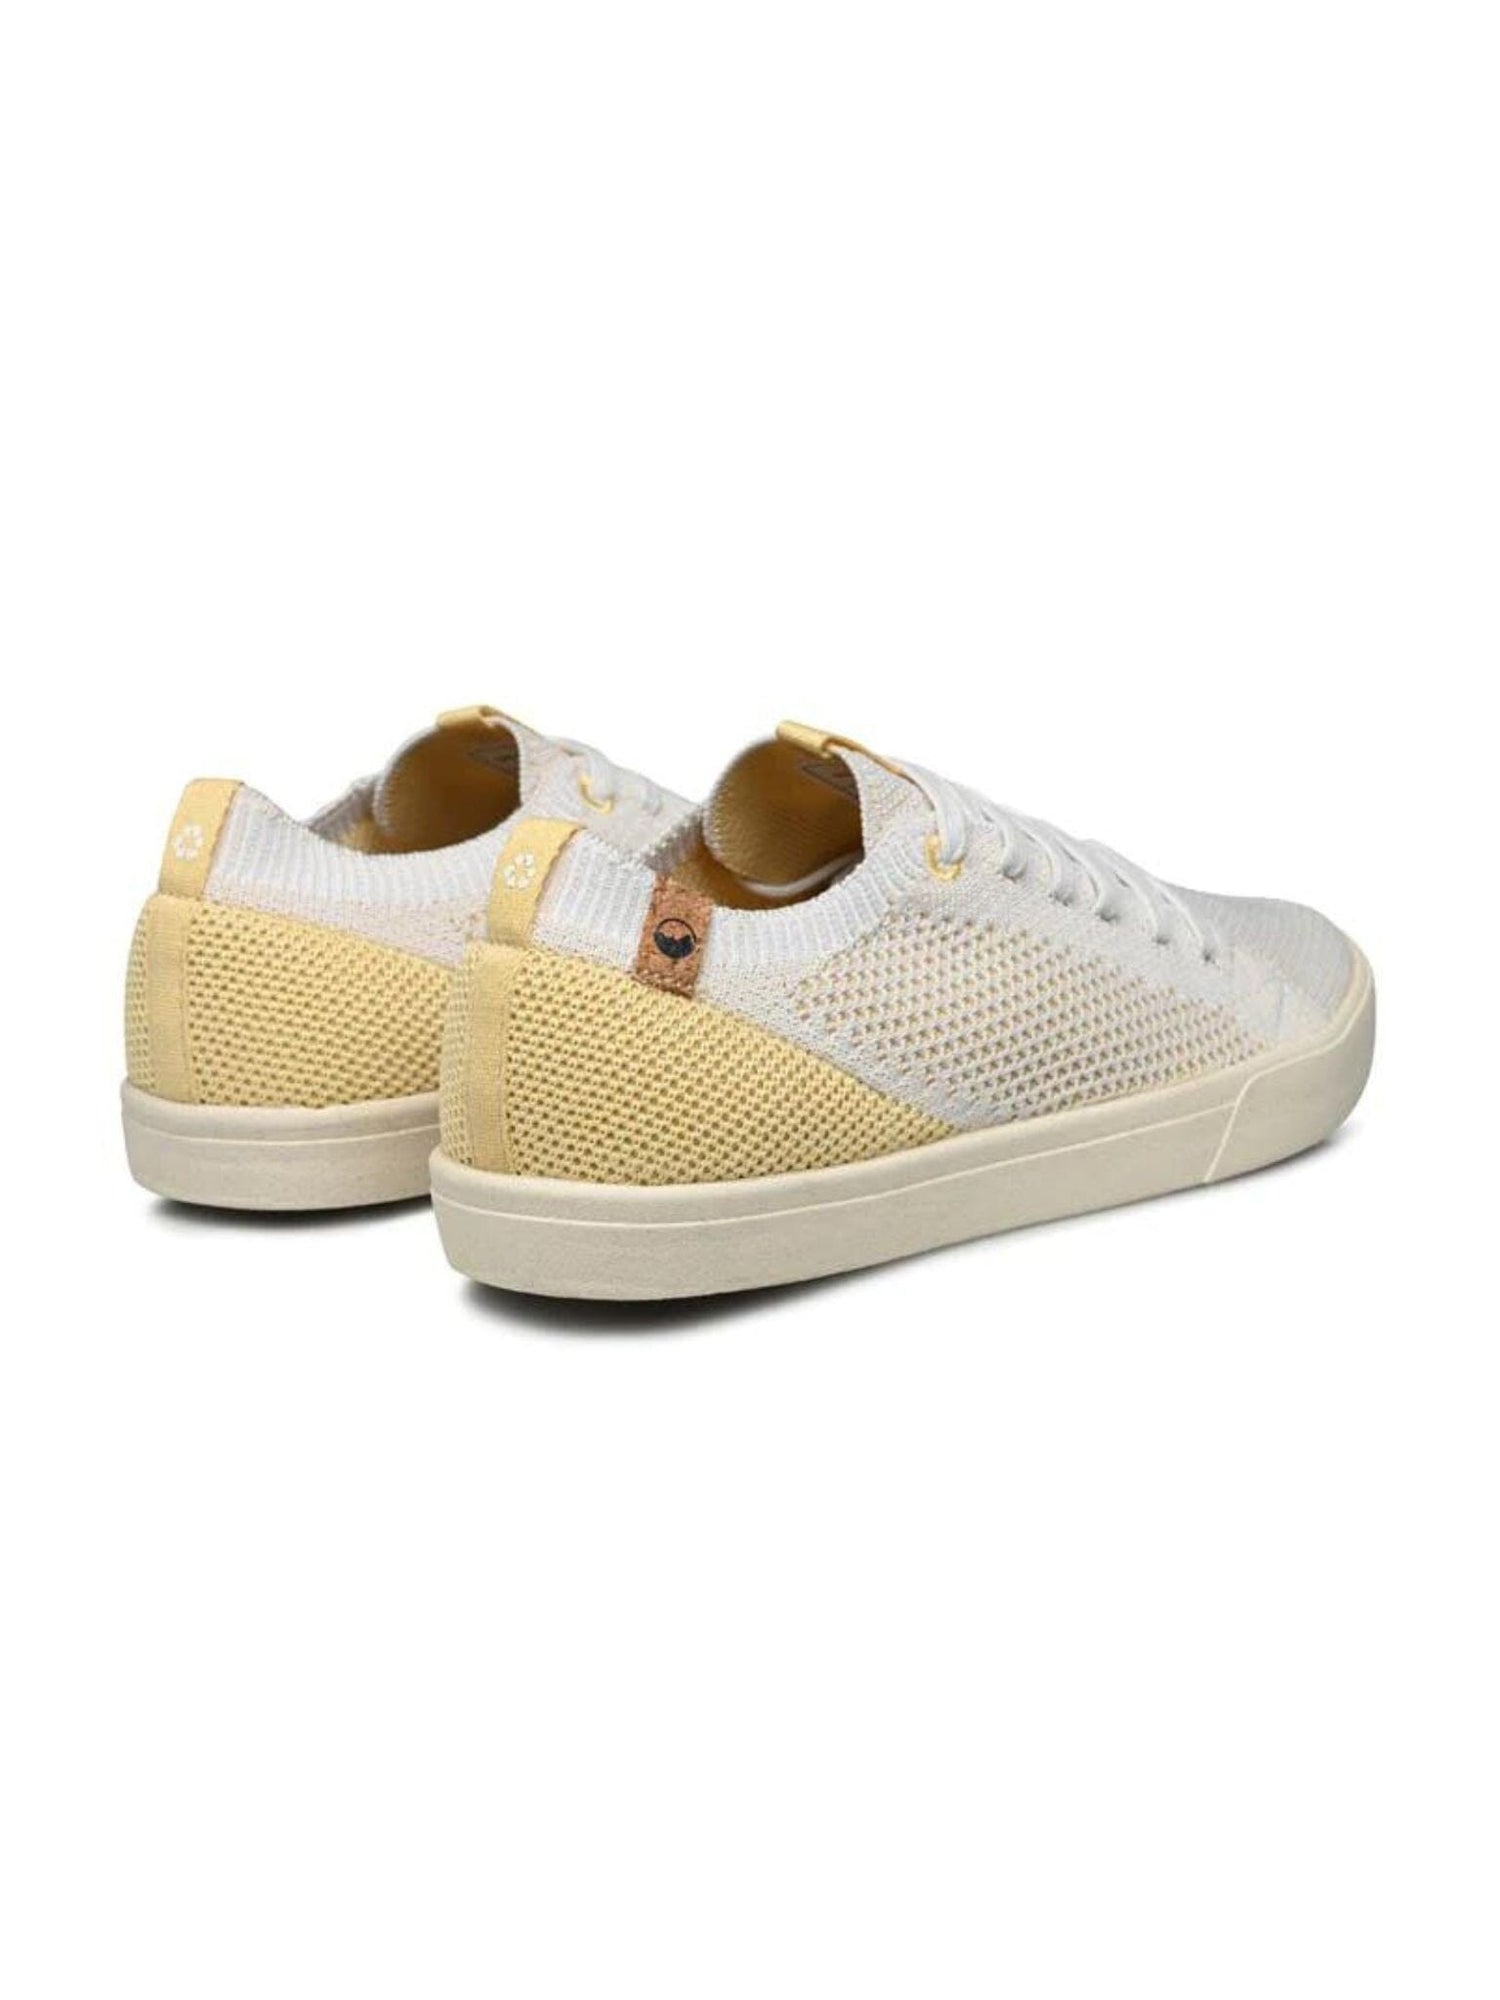 Saola W's Cannon Knit - Recycled PET White Straw Shoes